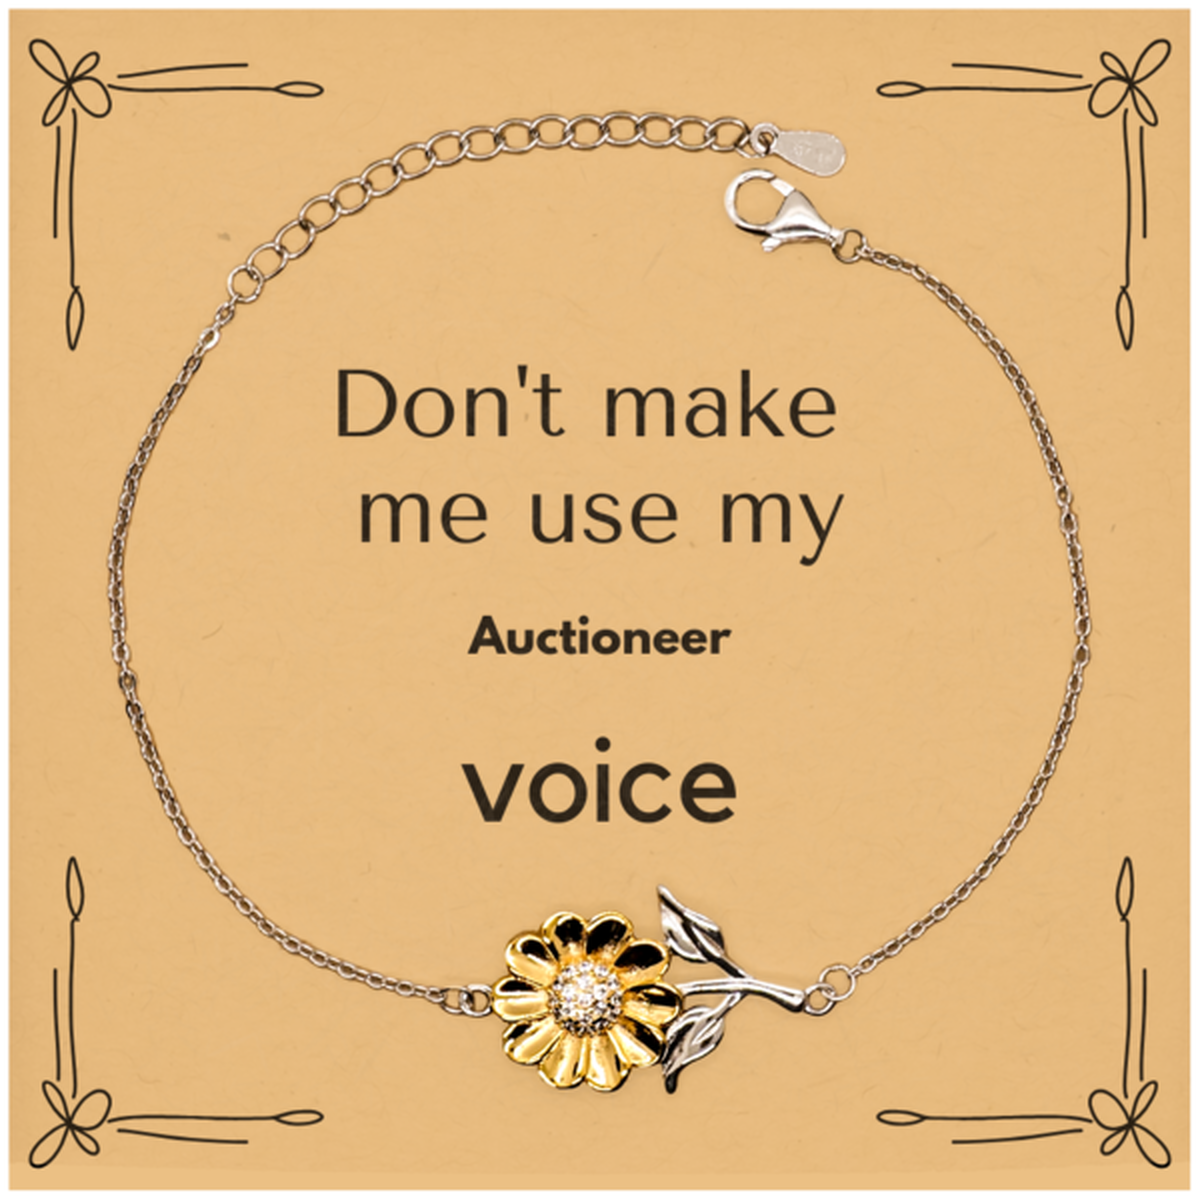 Don't make me use my Auctioneer voice, Sarcasm Auctioneer Card Gifts, Christmas Auctioneer Sunflower Bracelet Birthday Unique Gifts For Auctioneer Coworkers, Men, Women, Colleague, Friends